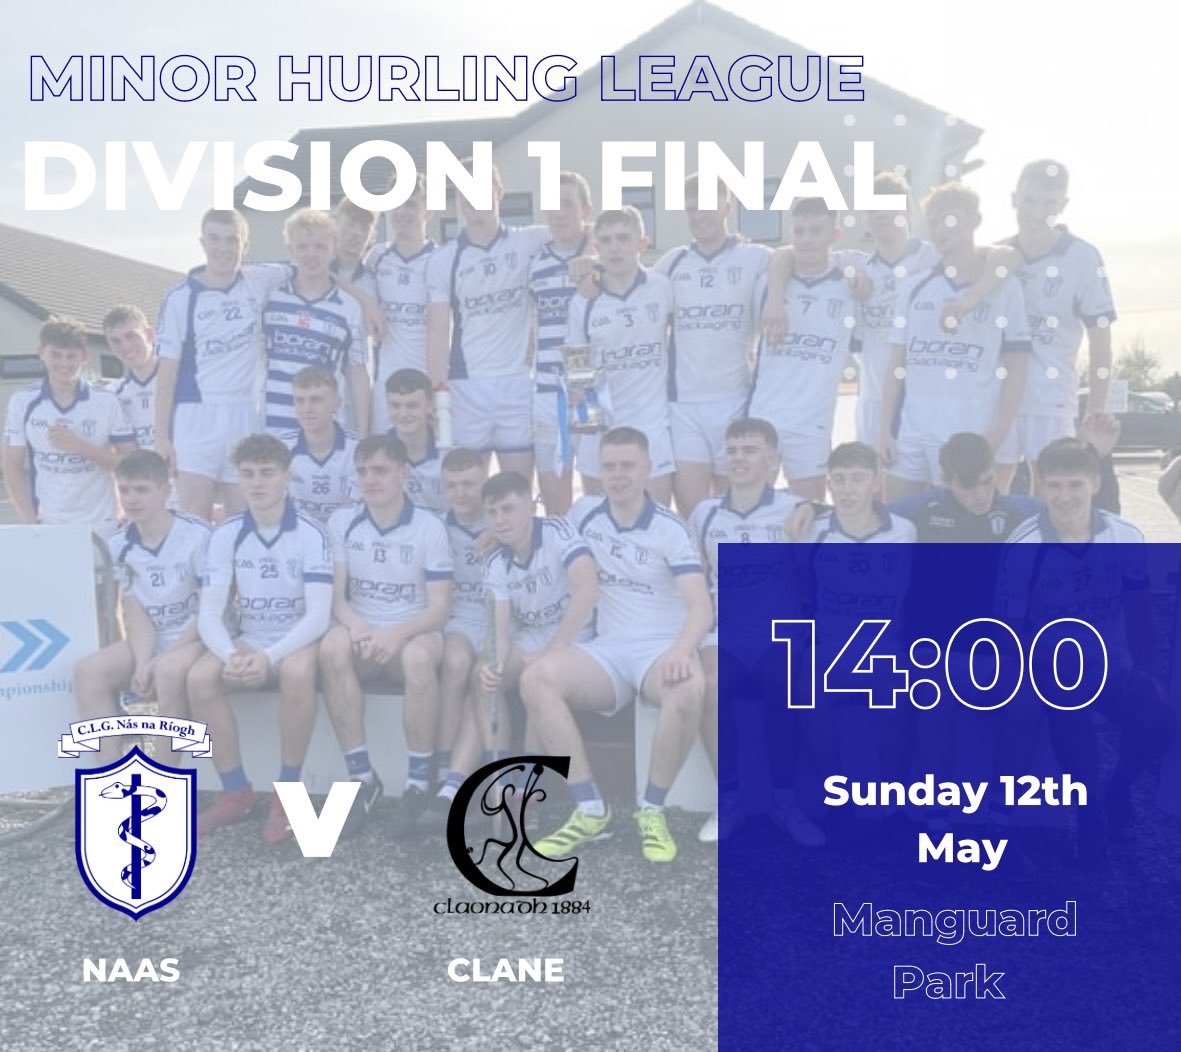 Best of luck to our Minor Hurling team who play Clane tomorrow in the Minor hurling league Final in Manguard Park at 2pm. All support greatly appreciated by the team and management. Link Below for tickets kildaregaa.ie/tickets/